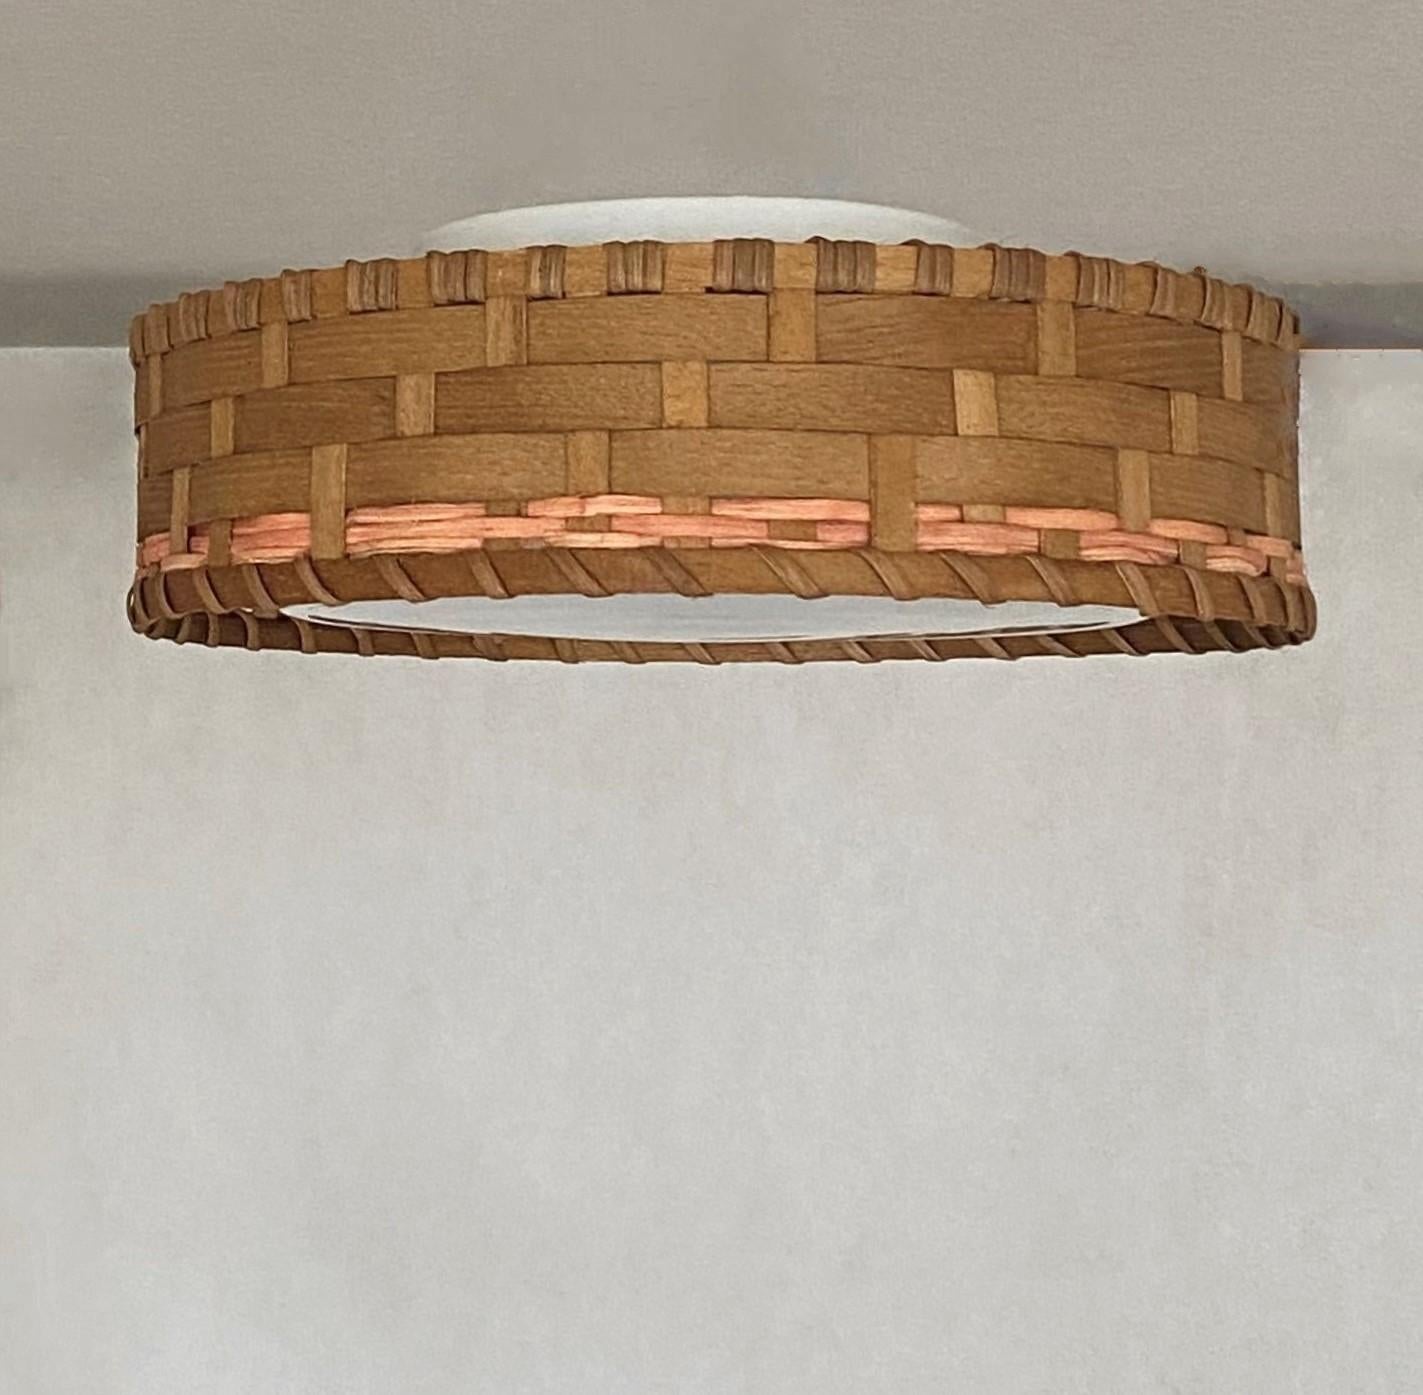 Mid-Century Modern Scandinavian design flush mount, 1960s, woven wicker basket around a Murano glass diffuser. This beaufiful piece is in very good vintage condition, no damages, rewired. It takes an E27 srew bulb up to 60watt. LED bulbs can also be